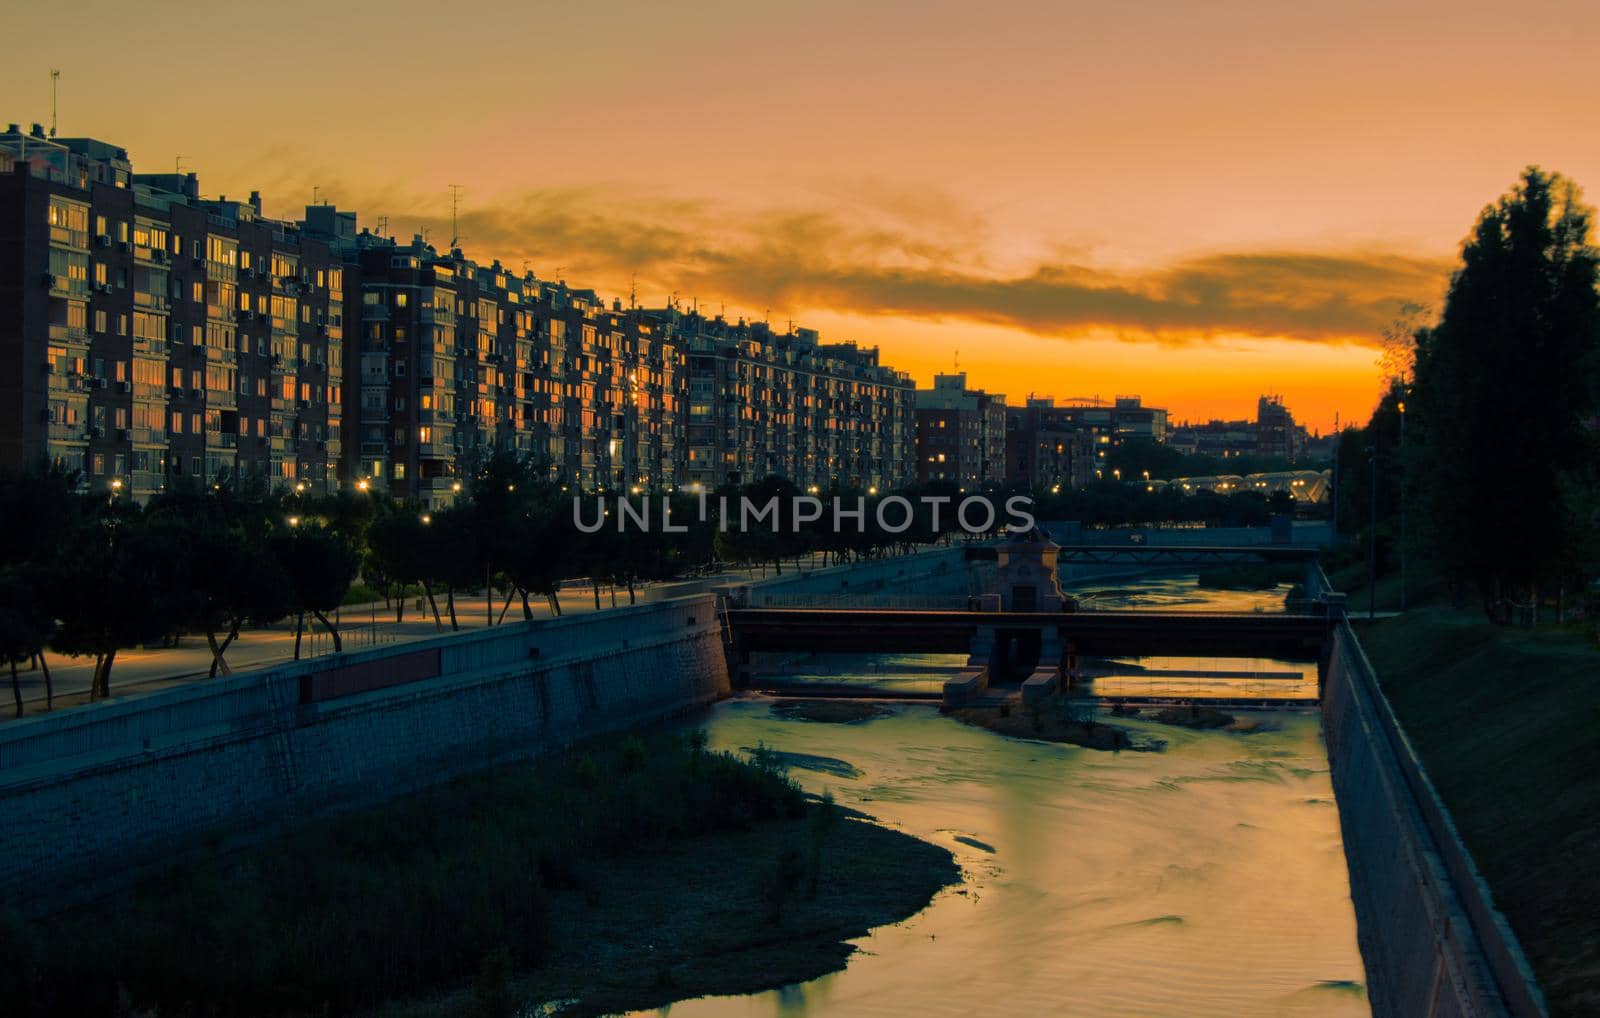 Madrid landscape on the river at sunset with buildings in the background